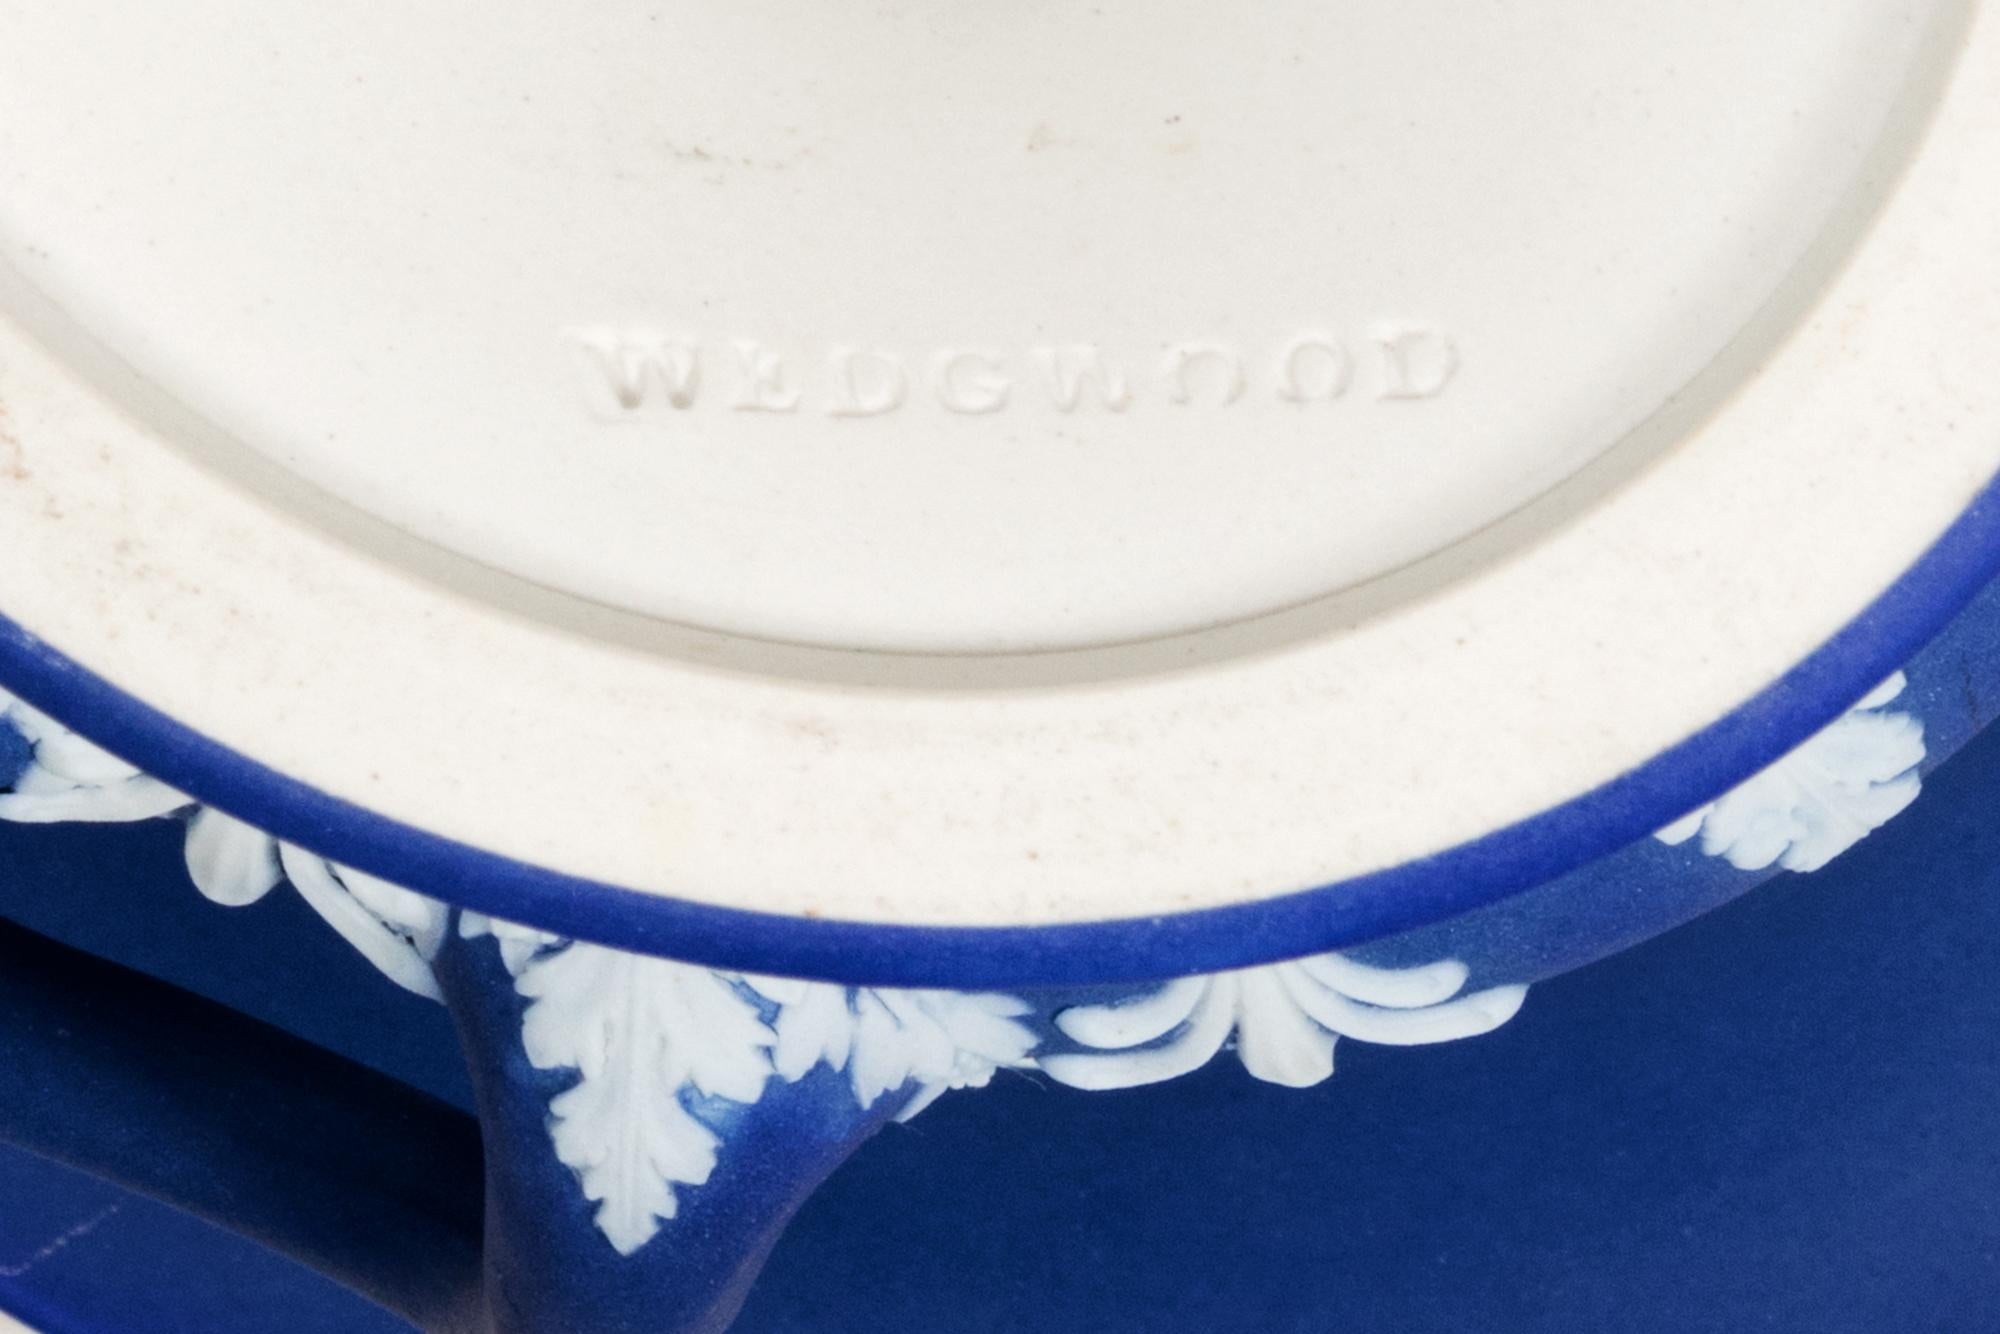 19th Century Wedgwood Jasperware twin handled campagne urn and cover, in the Neoclassical style, decorated with a frieze of Greek figures, with palmette borders in white on a blue background.